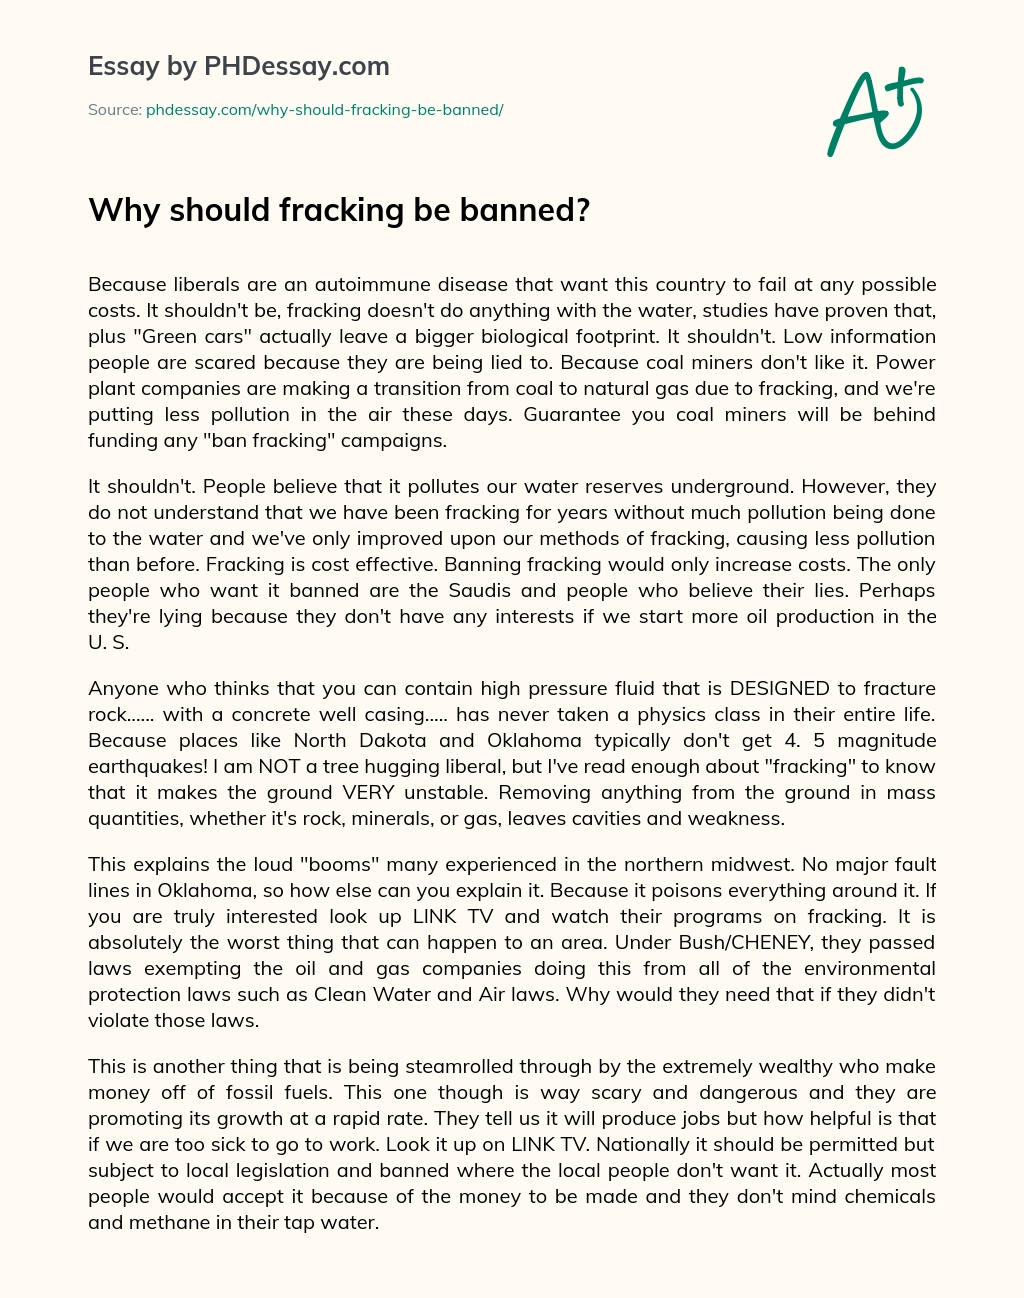 Why should fracking be banned? essay